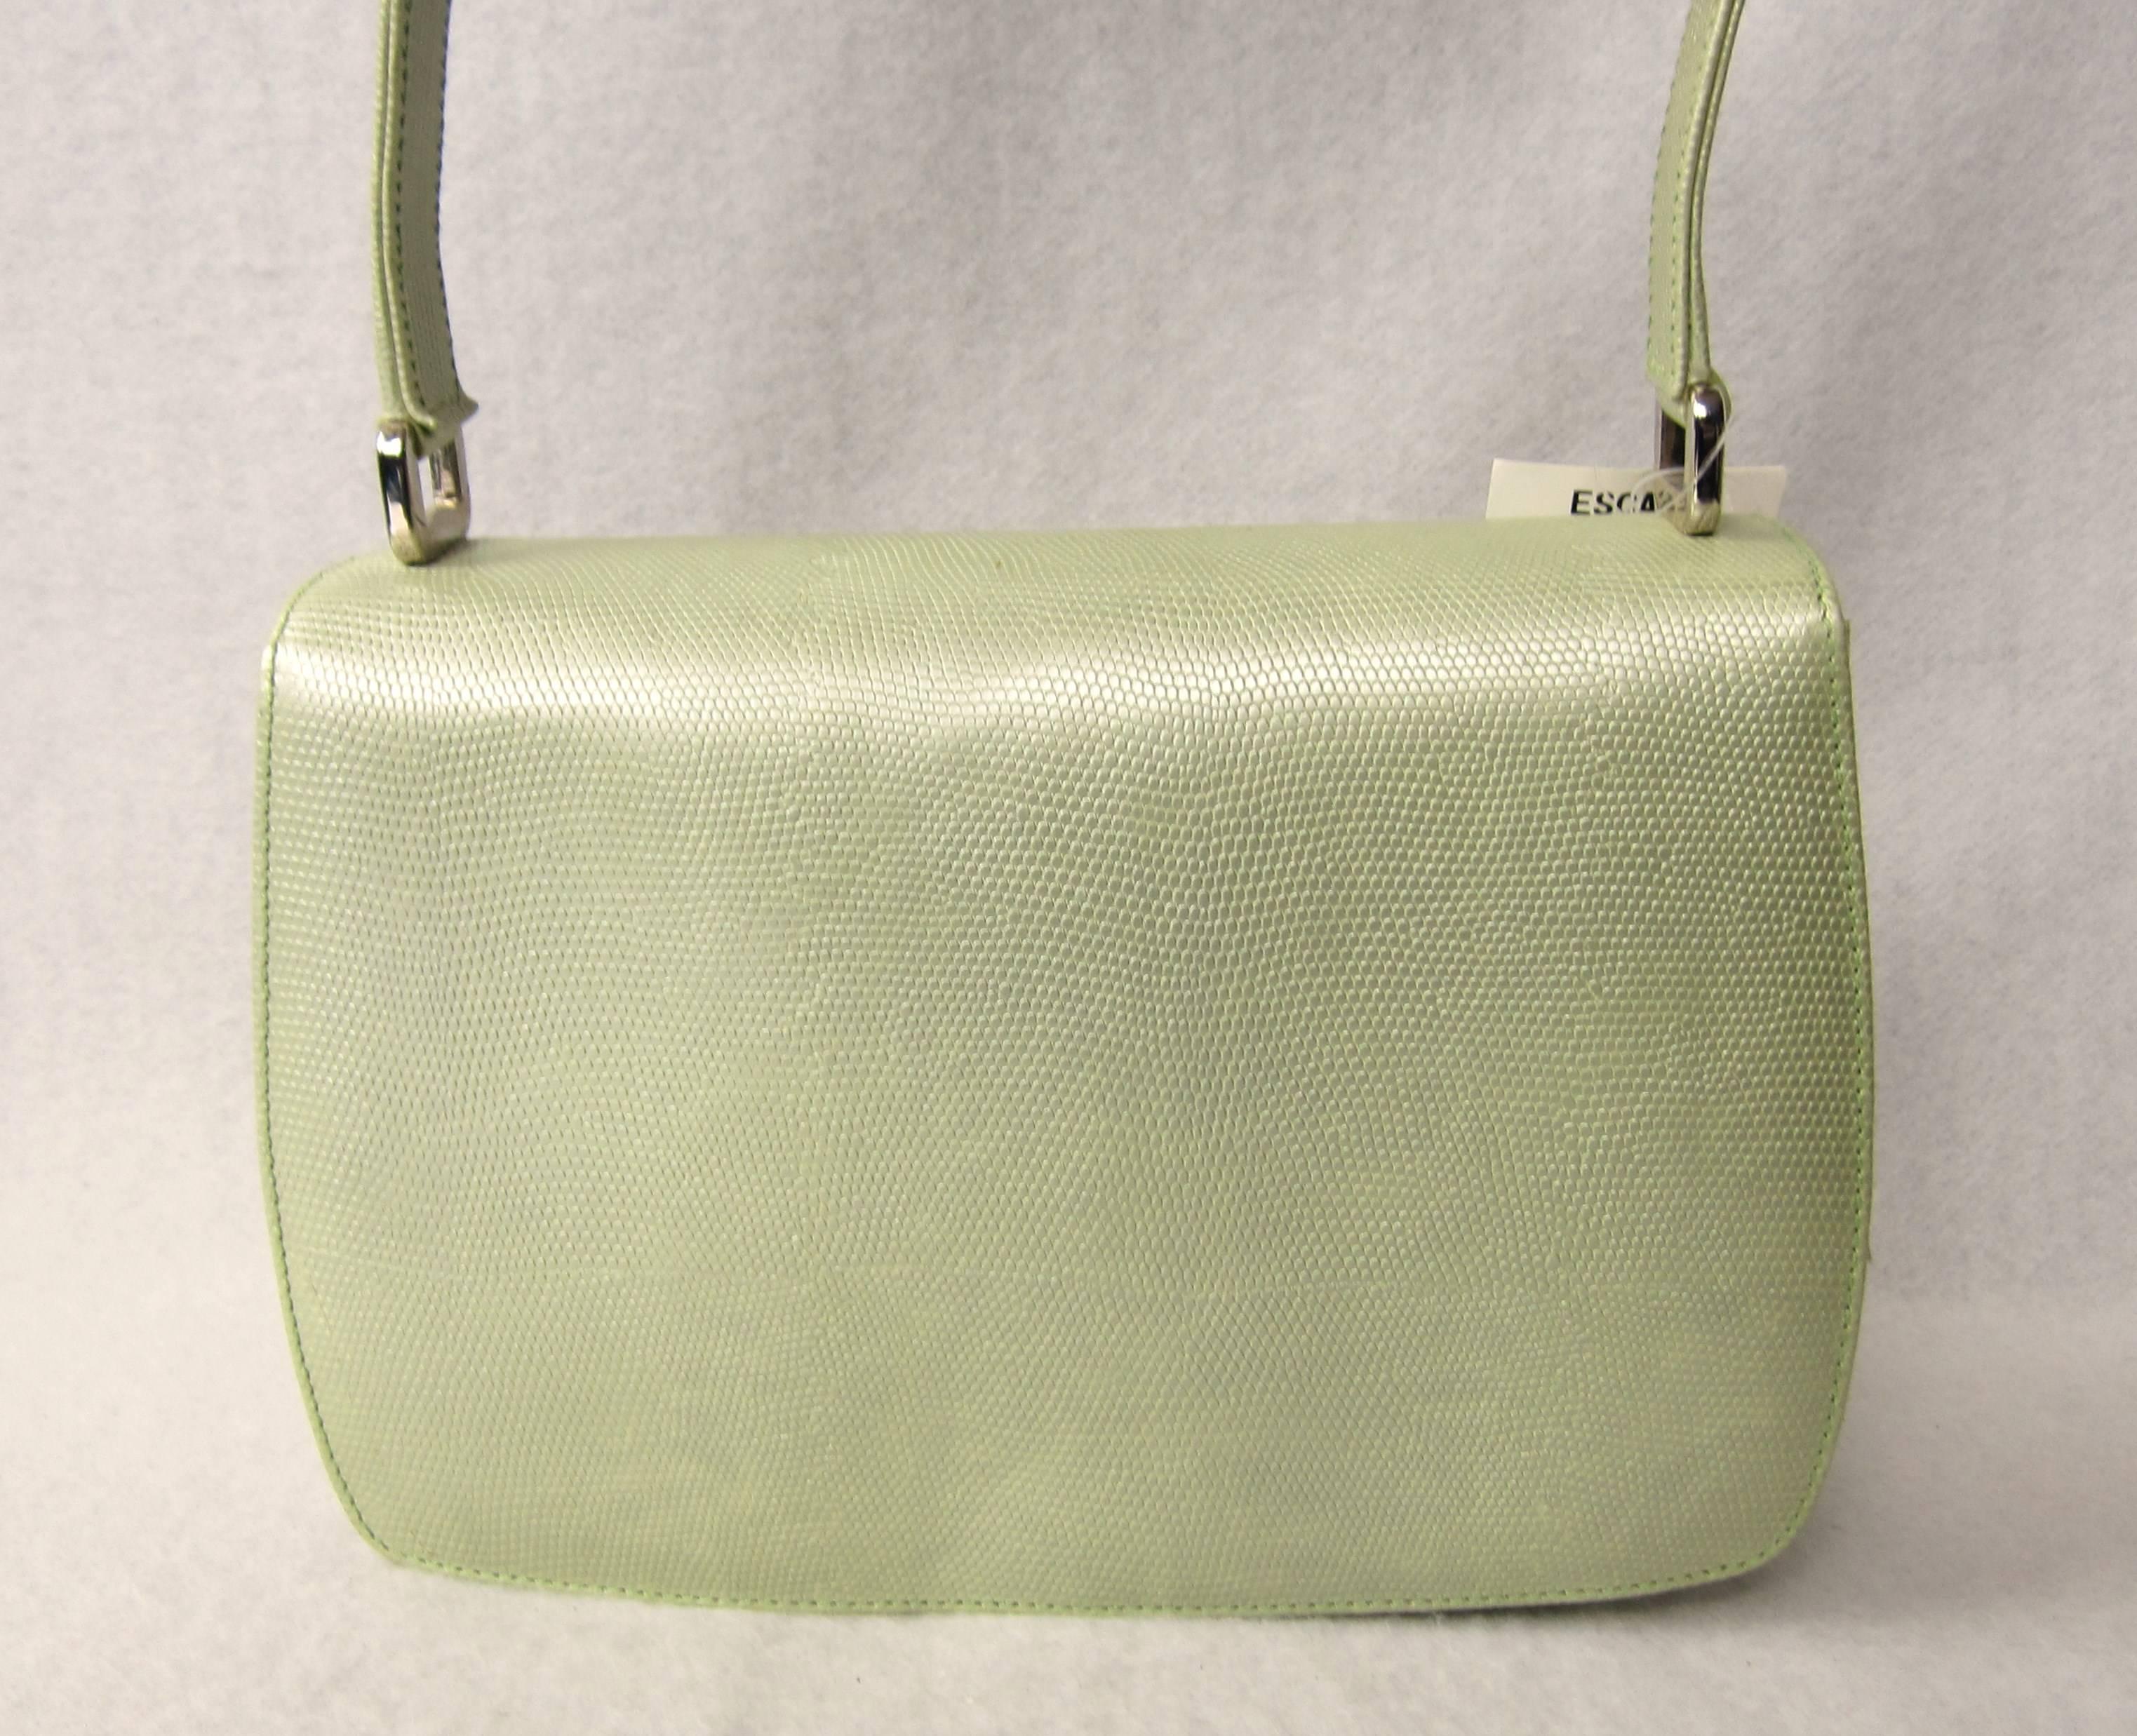 Pearlized Soft Green color Reptile Embossed Leather Box Shaped Shoulder bag Purse with SILVER tone Escada Clasp Logo on the top of the handbag. The color is very soft lime green. The tag color 450-lime Style 1620-450 Made in Italy -- 8-7/8  across